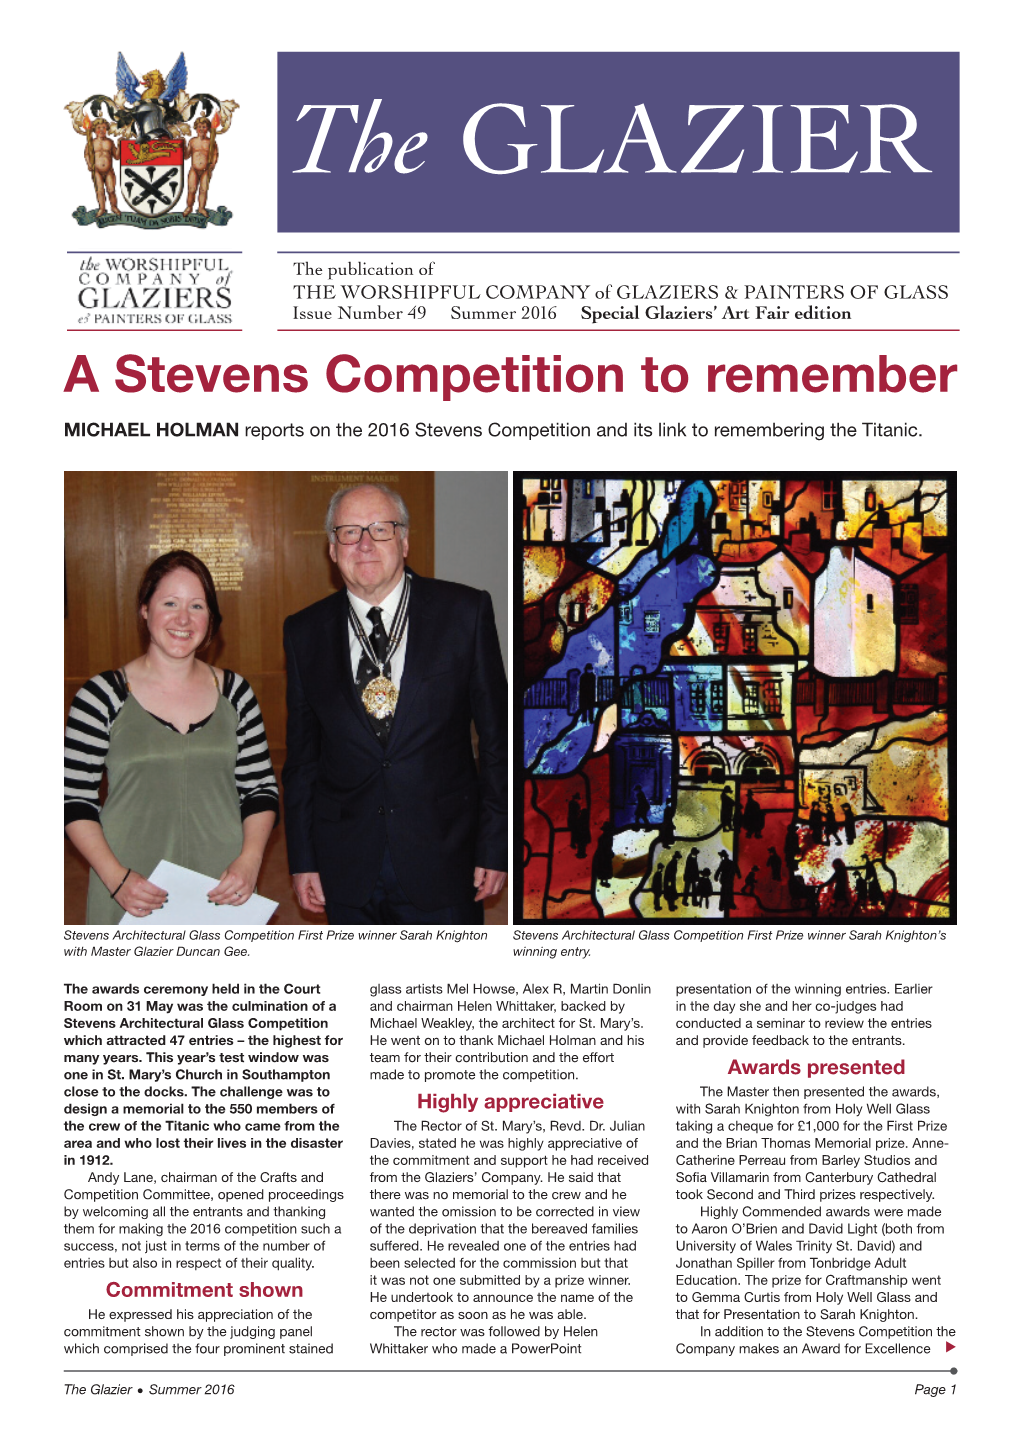 A Stevens Competition to Remember